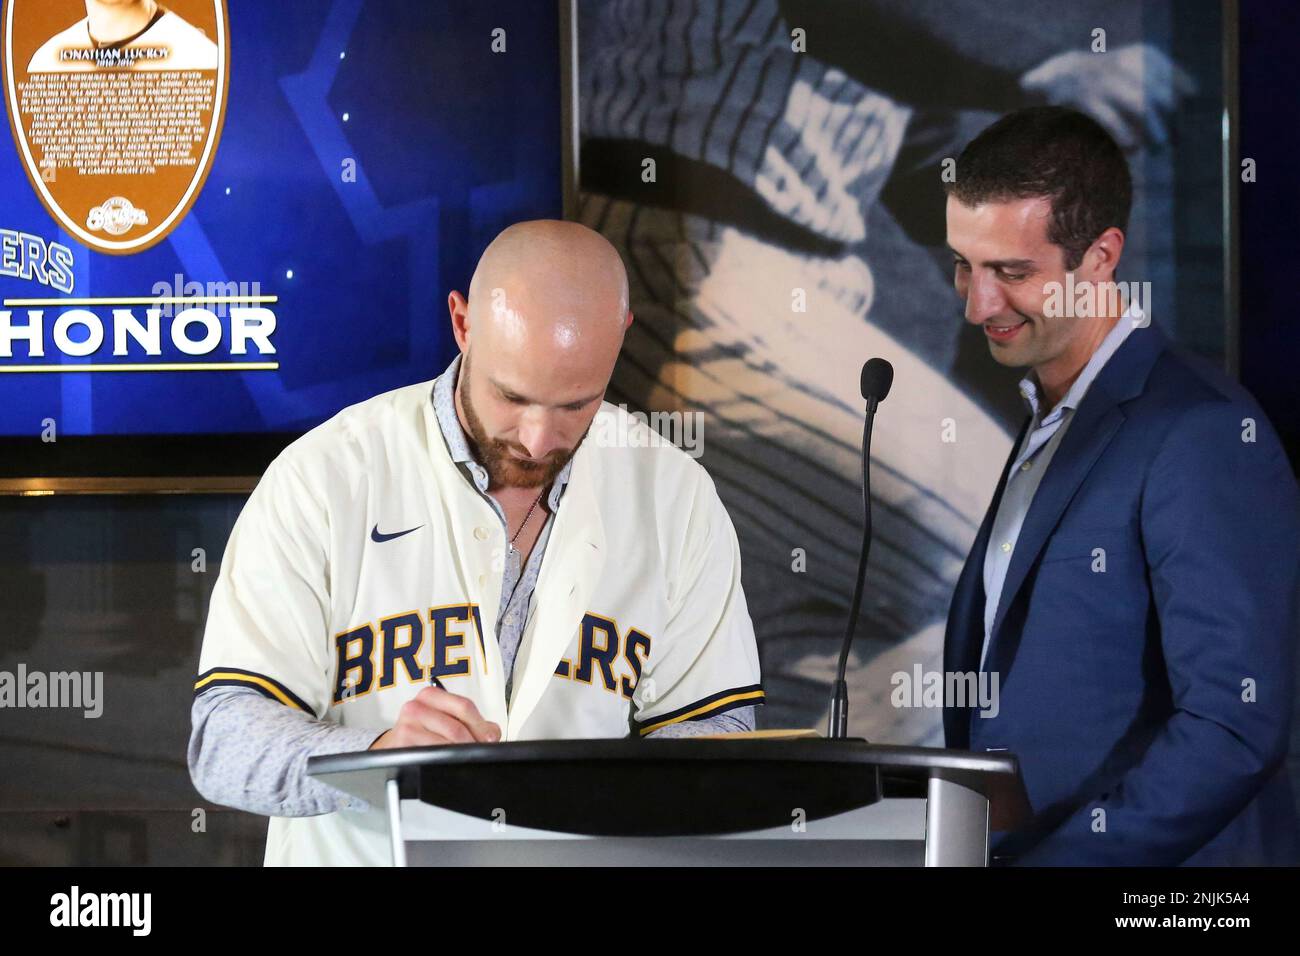 MILWAUKEE, WI - AUGUST 06: Milwaukee Brewer catcher Jonathan Lucroy signs  his retirement papers prior to a game between the Milwaukee Brewers and the  Cincinnati Reds at American Family Field on August